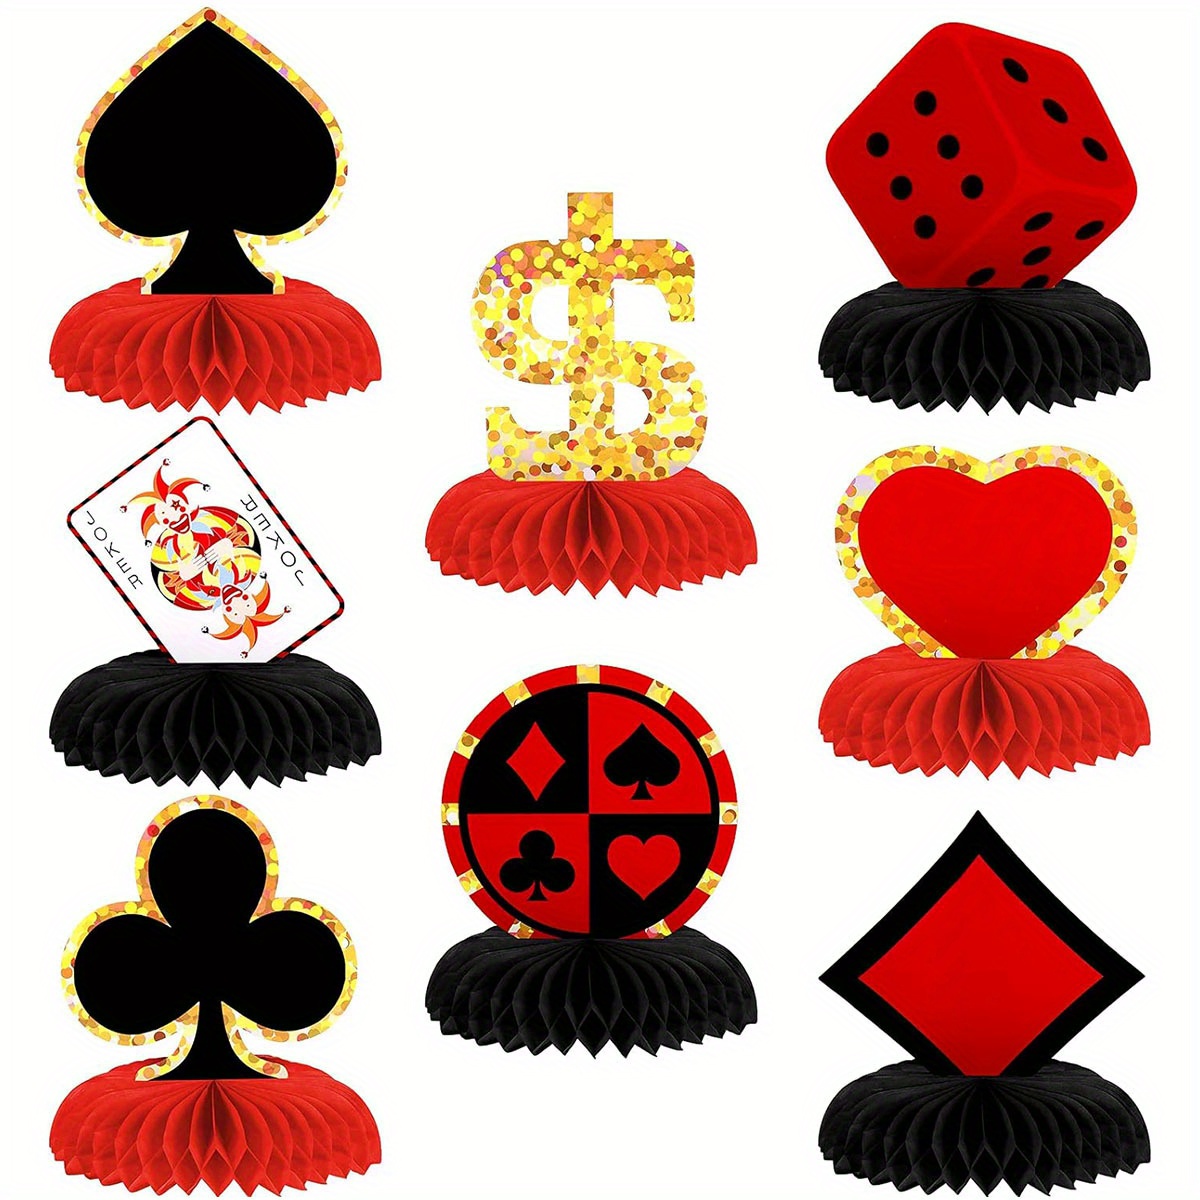 

Art Deco Poker Honeycomb Centerpieces For Party Decorations, Table Settings, And Gatherings - Paper Pedestals Without Electricity Required